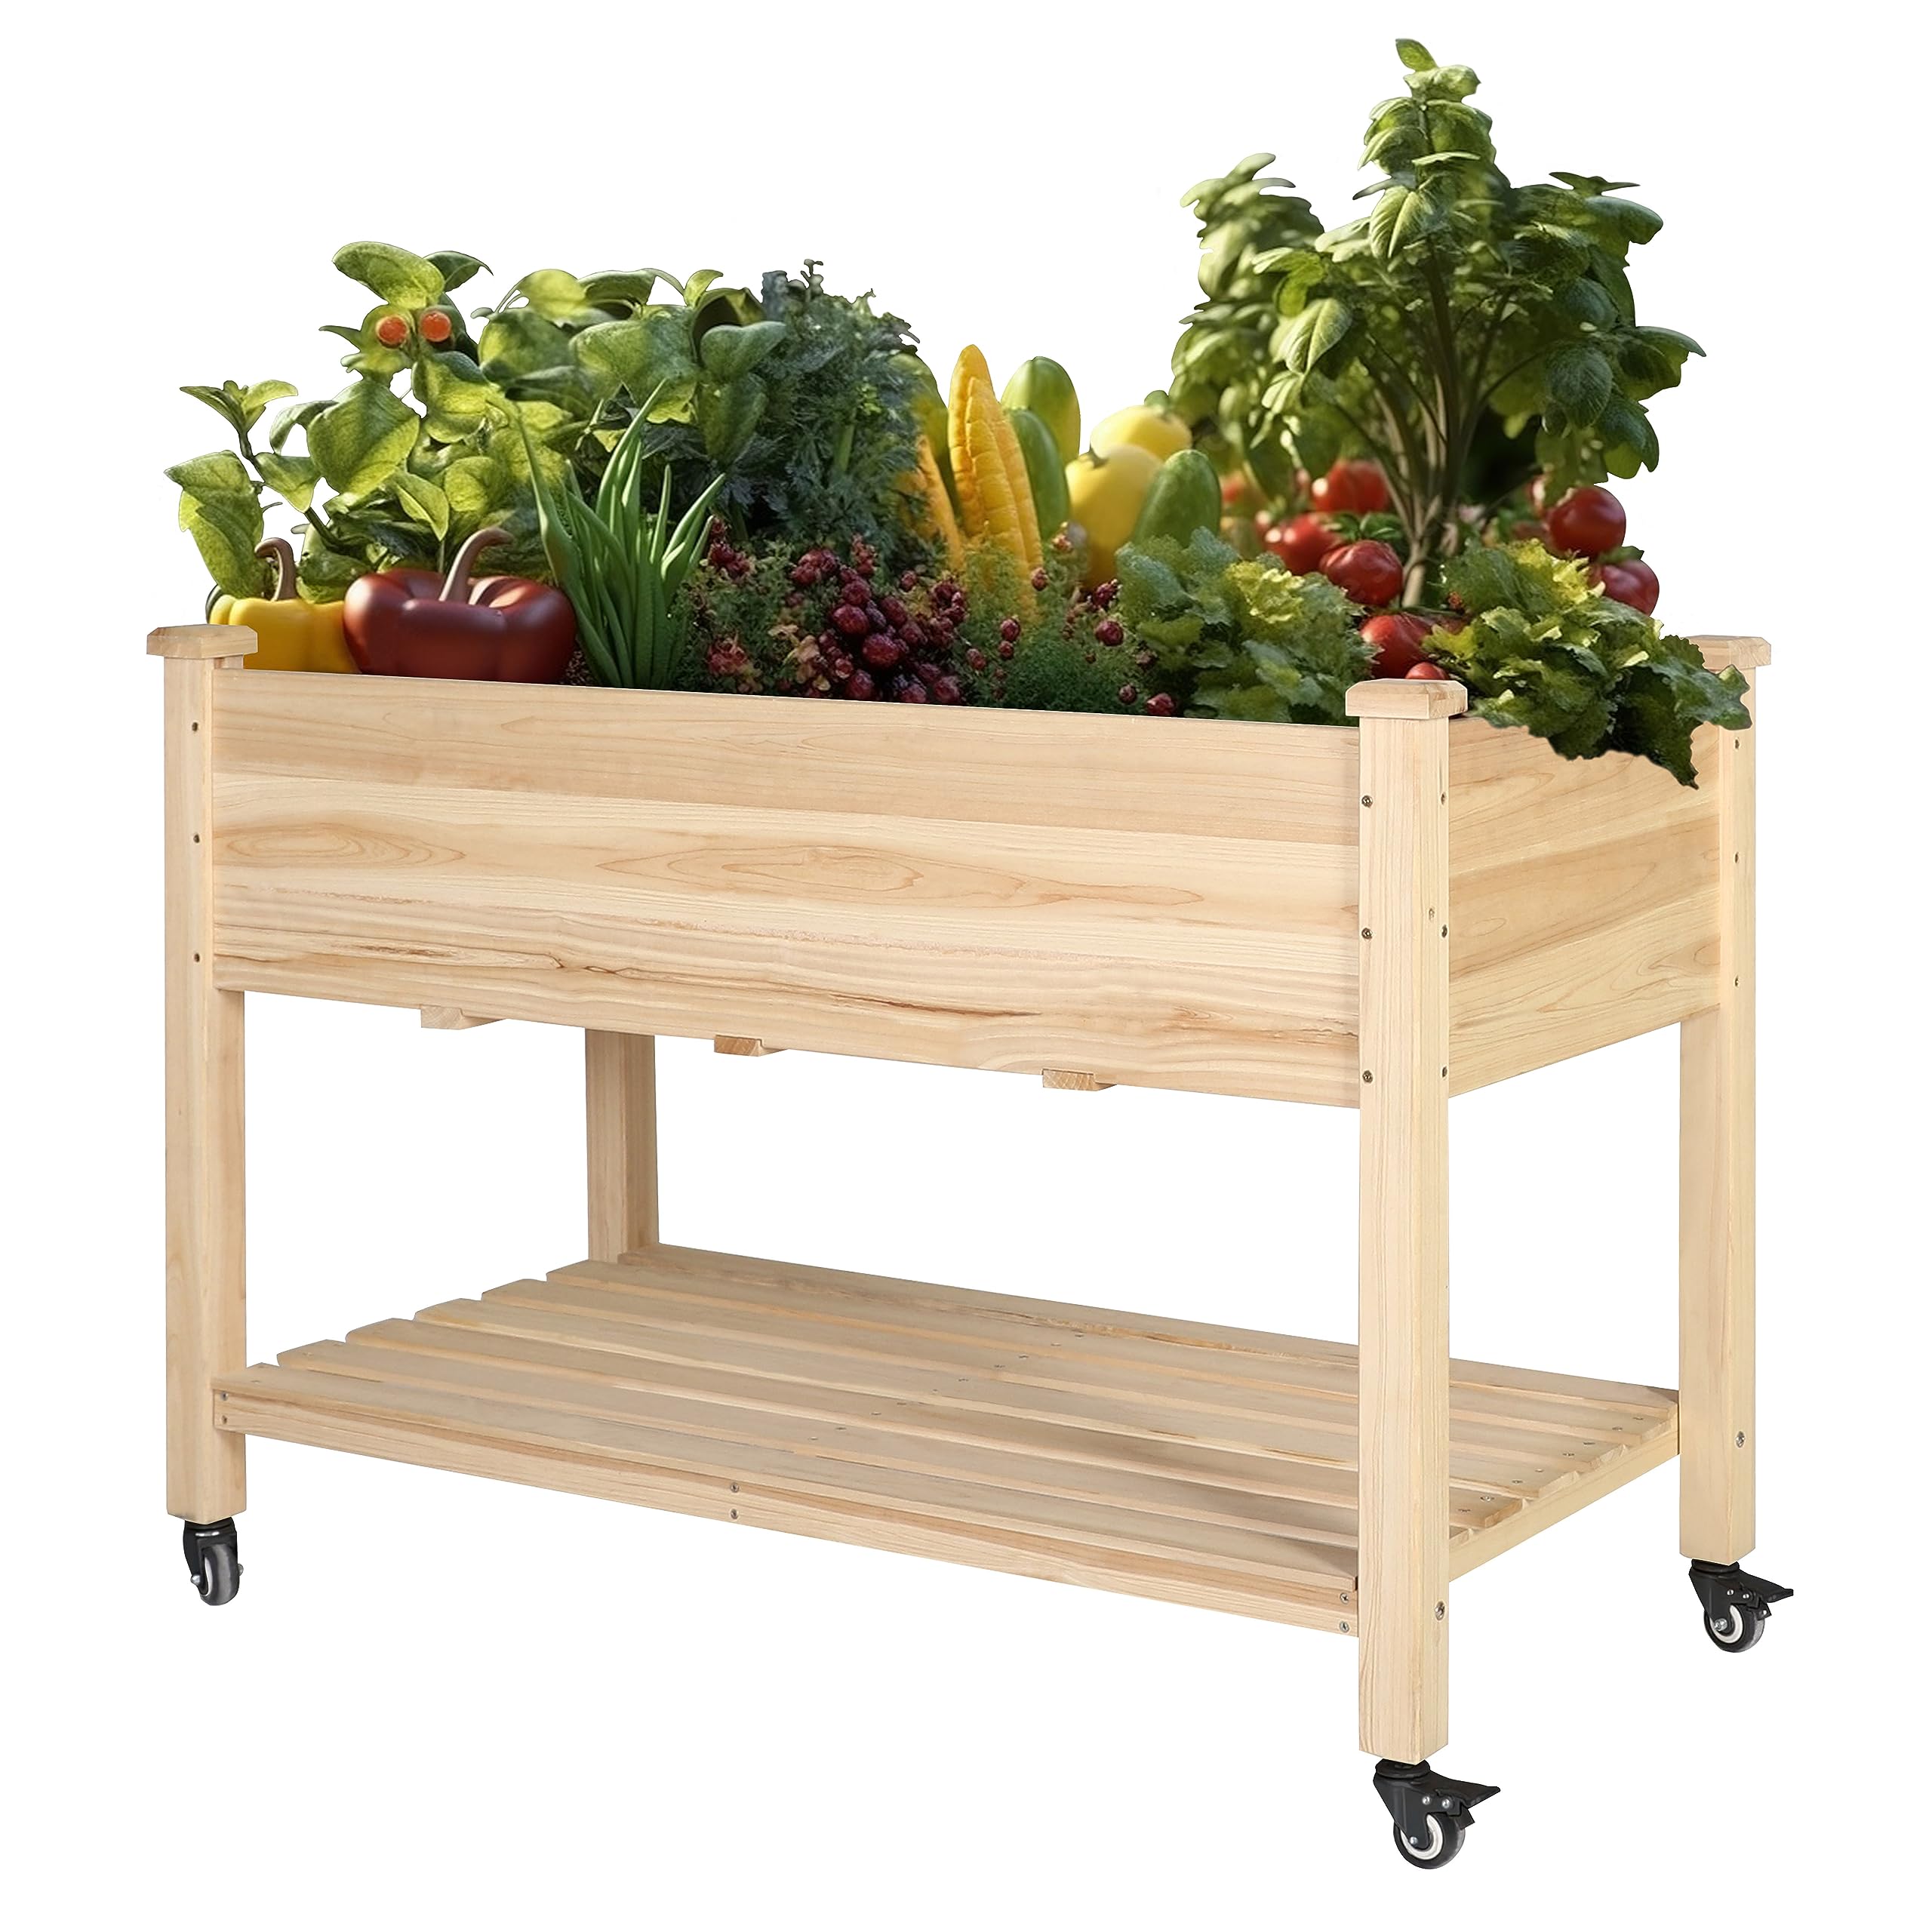 VEIKOU Raised Garden Bed, Planter Box on Wheels with Storage Shelf, Raised Garden Bed with Legs for Patio Backyard, Patio, Balcony, Natural Wood